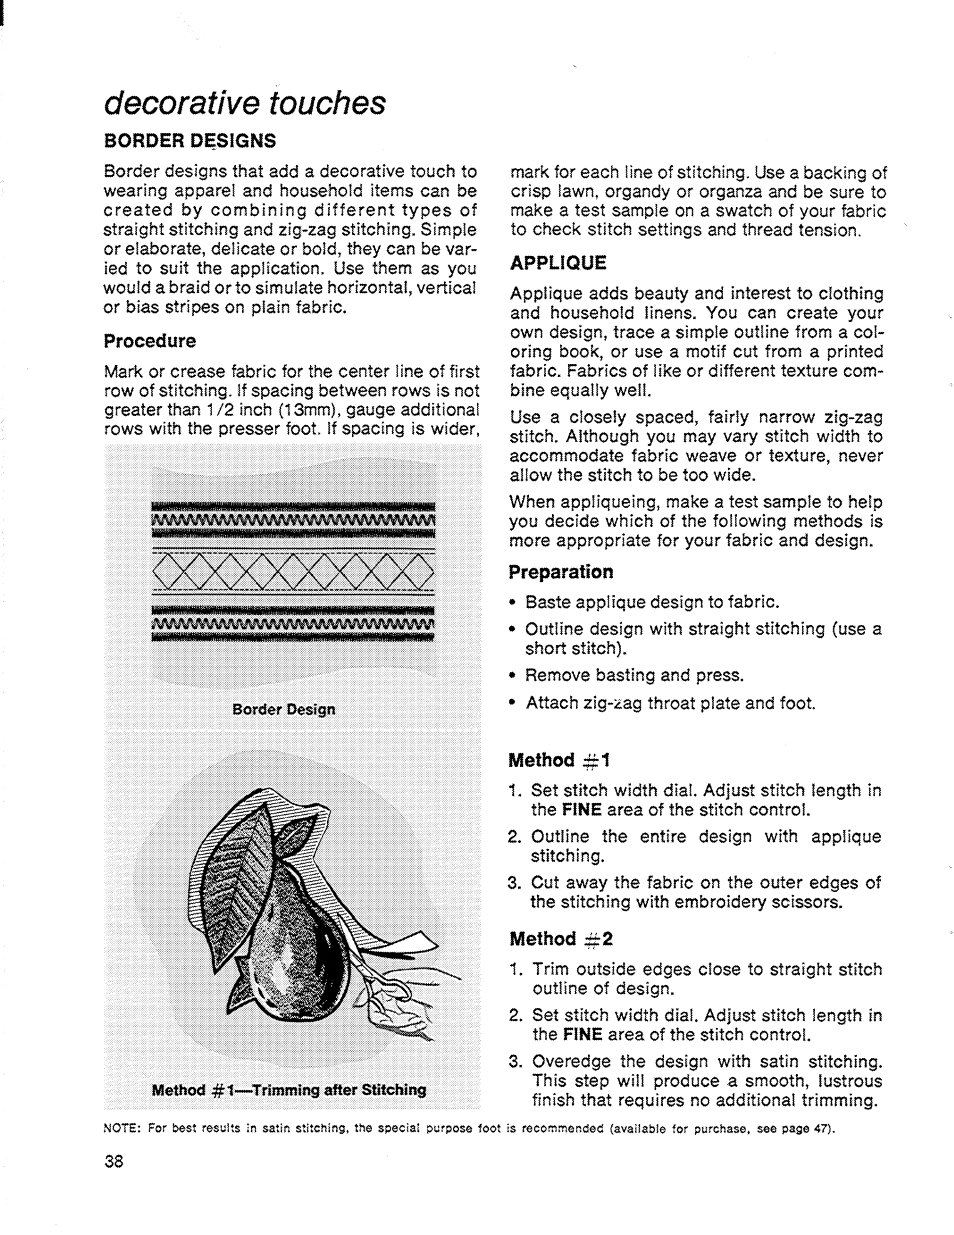 Decorative touches, Border design, Meuiod #1—^trimming after stitching | SINGER 714 Graduate User Manual | Page 40 / 52